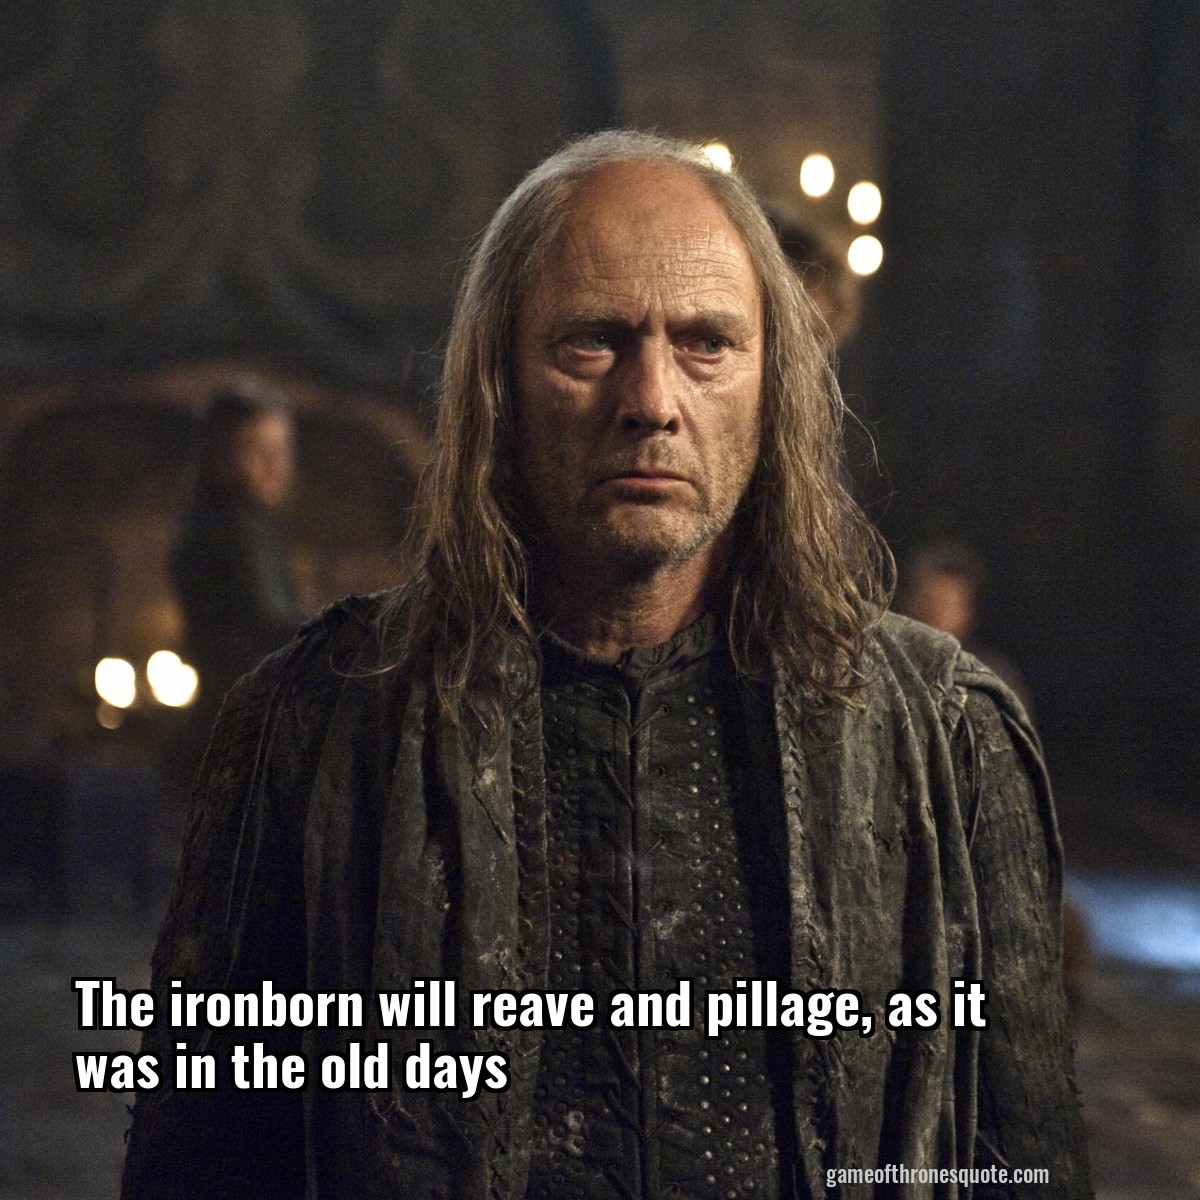 The ironborn will reave and pillage, as it was in the old days